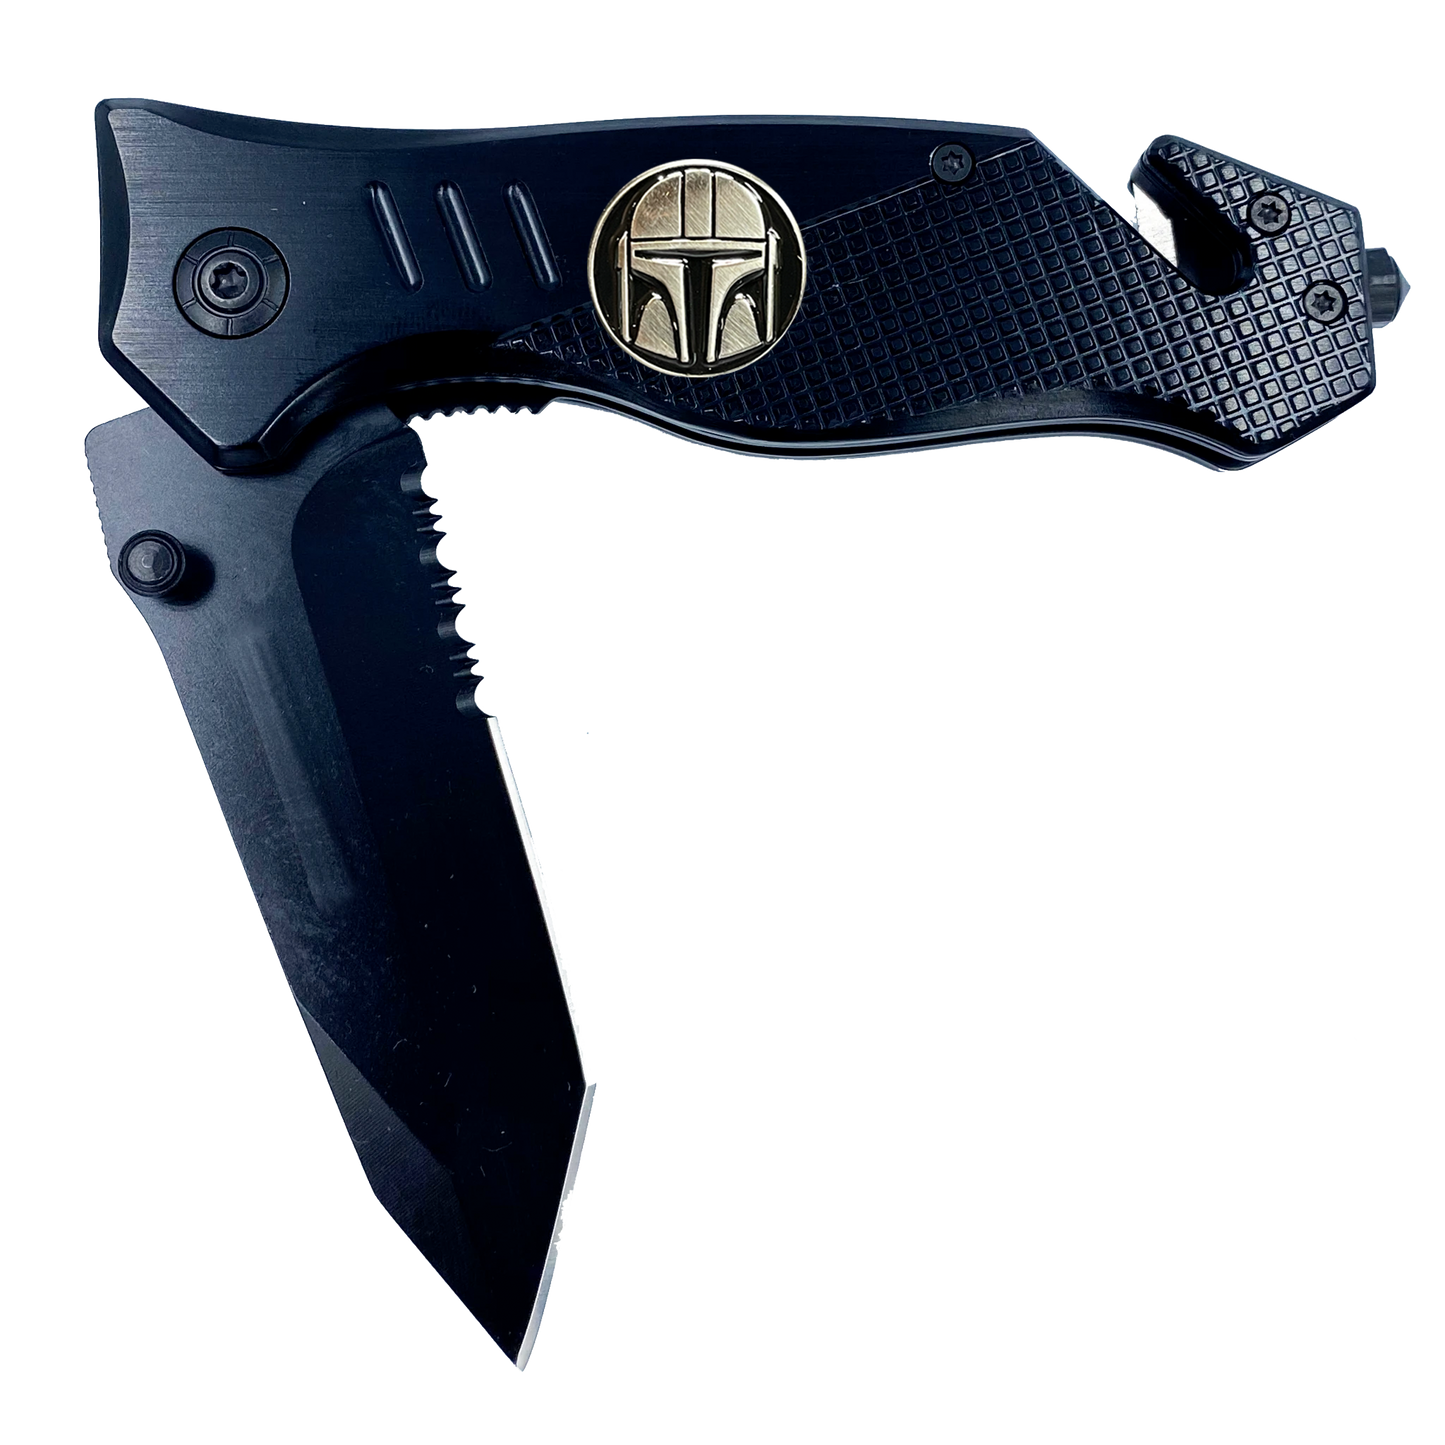 GL3-017 Mandalorian Inspired 3-in-1 Police Tactical Rescue knife tool knife Star Wars parody with Seatbelt Cutter, Steel Serrated Blade, Glass Breaker